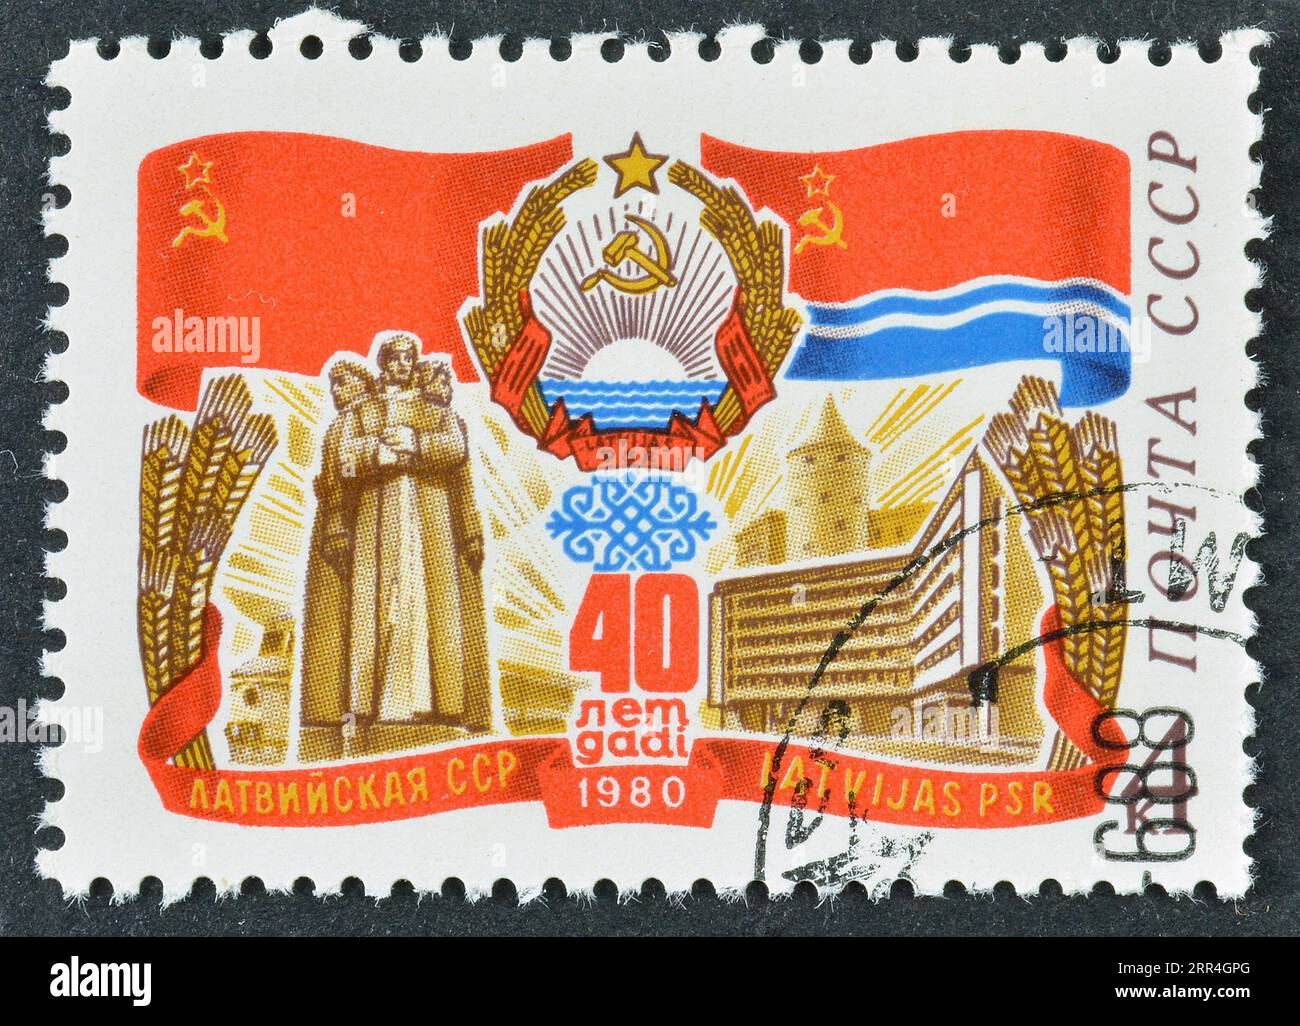 Cancelled postage stamp printed by USSR, that celebrates 40th Anniversary of Latvian SSR, circa 1980. Stock Photo